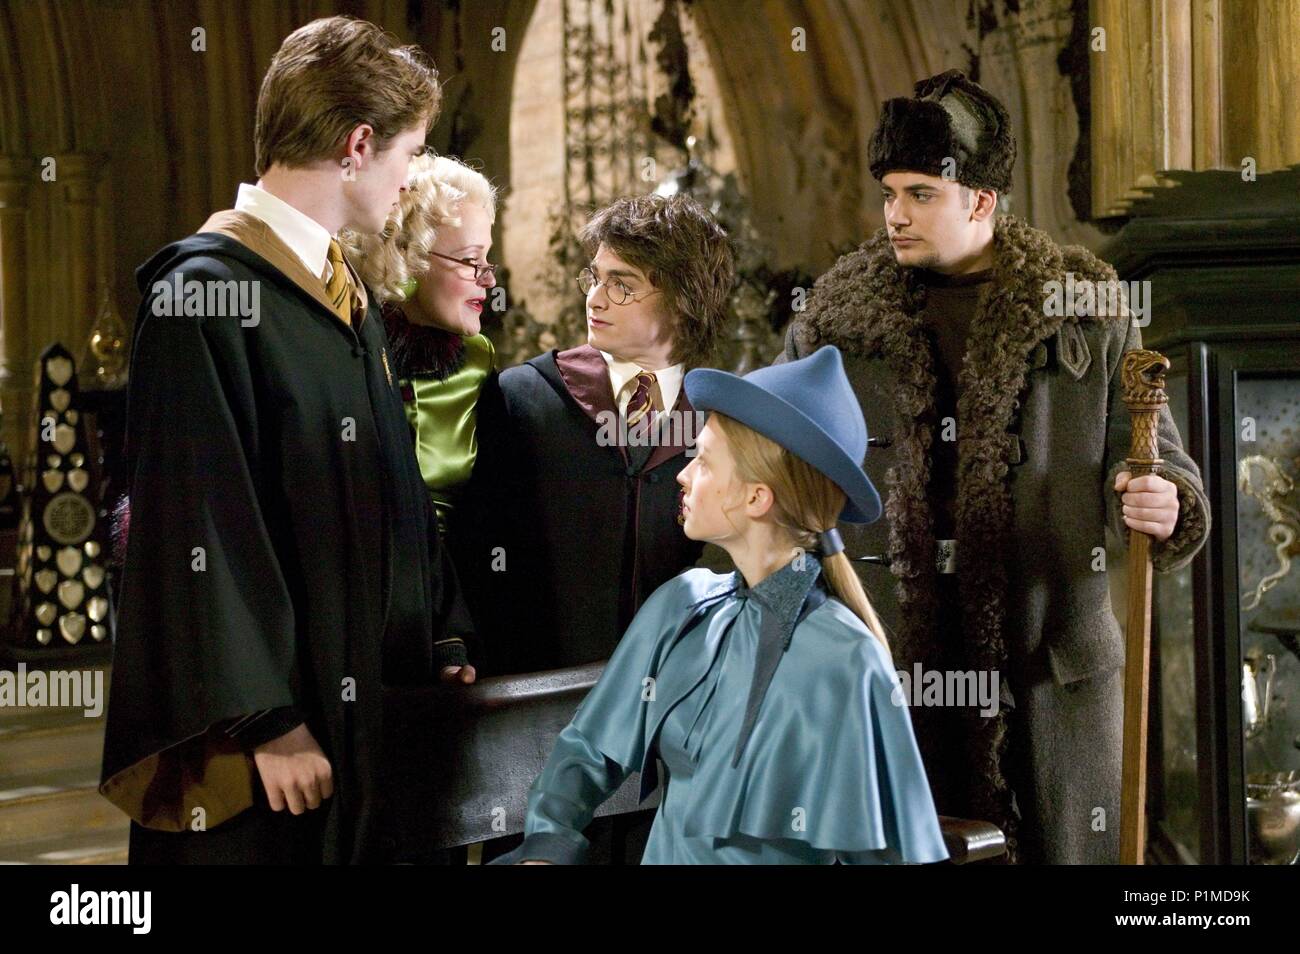 Robert pattinson harry potter hi-res stock photography and images - Alamy